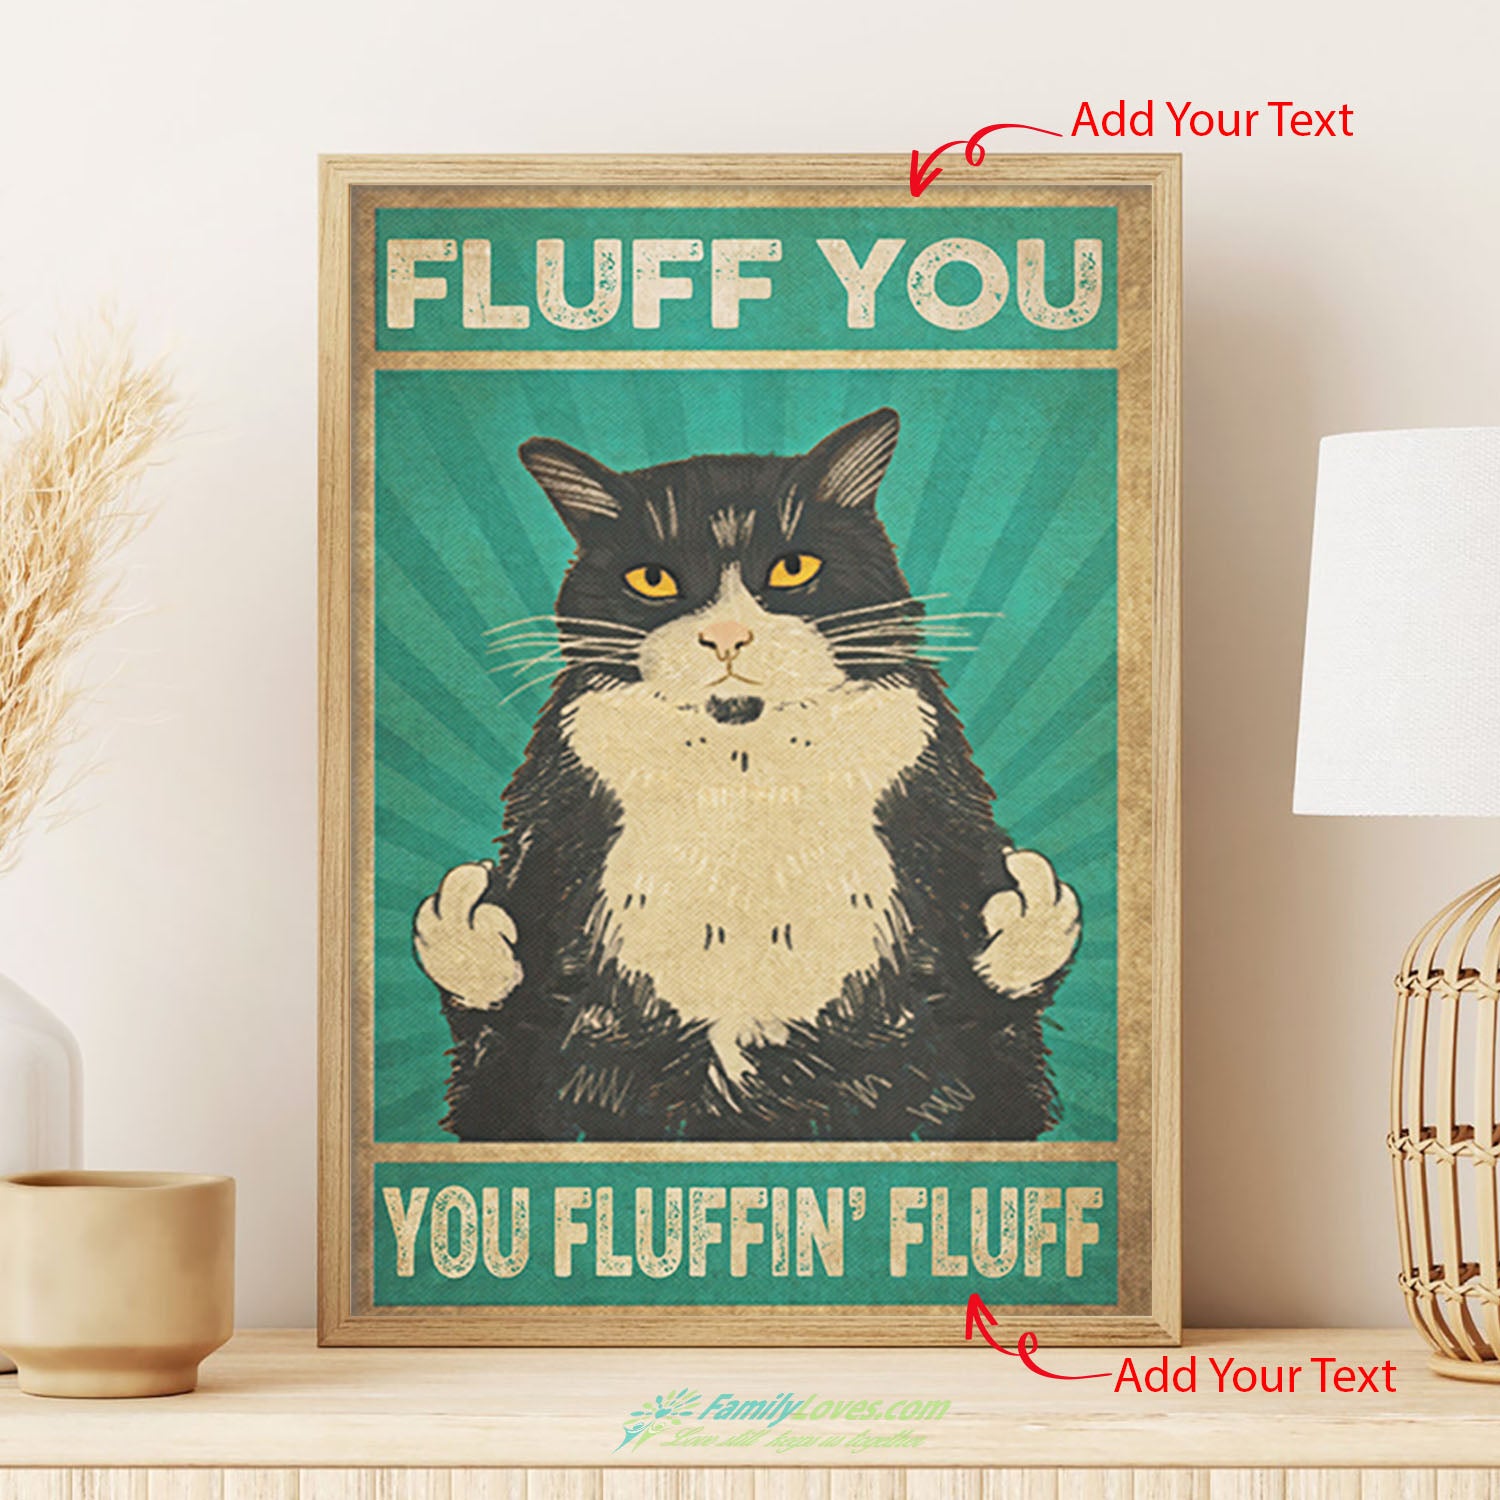 Fluff You You Fluffin Fluff Large Canvas Art Poster Frames All Size 1